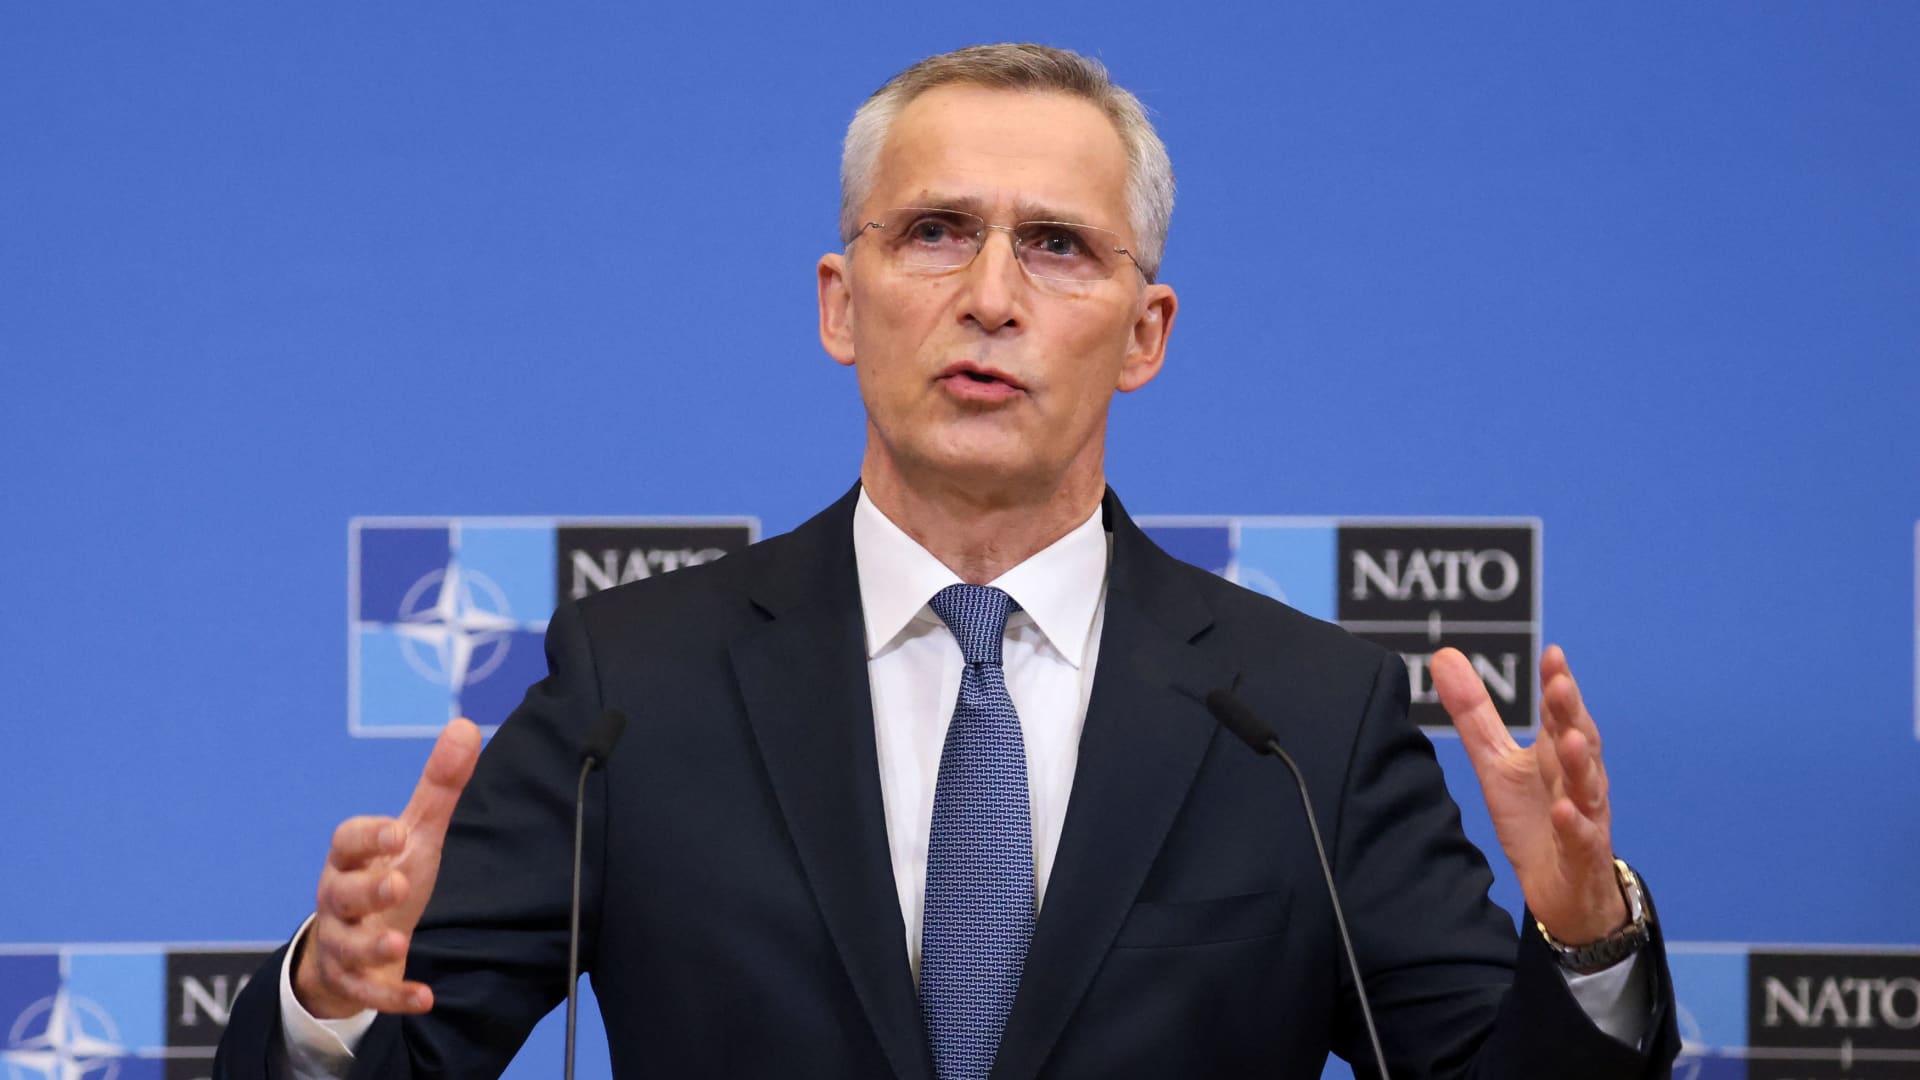 NATO Secretary-General Jens Stoltenberg speaks at a news conference following a NATO leaders virtual summit, after Russia launched a massive military operation against Ukraine, in Brussels, Belgium February 25, 2022.